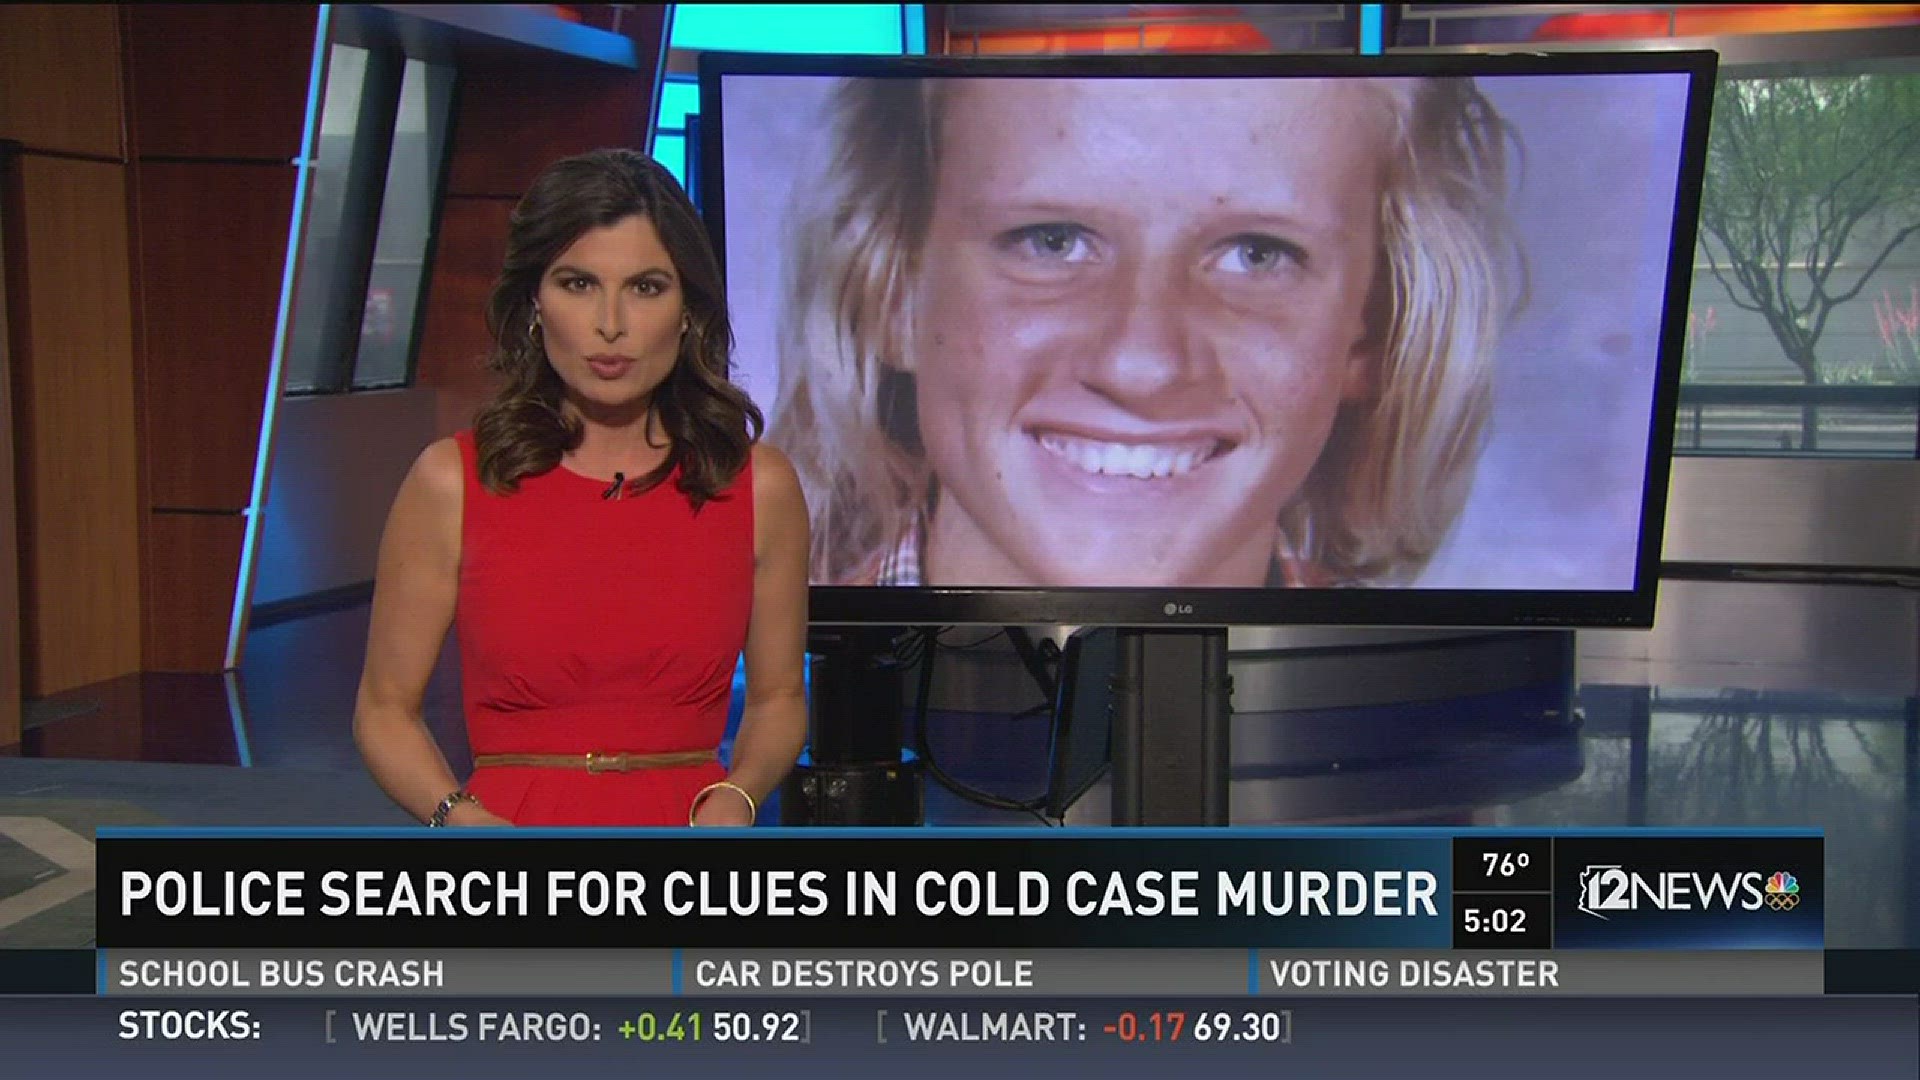 The brother of a woman found dead almost four decades ago is still searching for answers